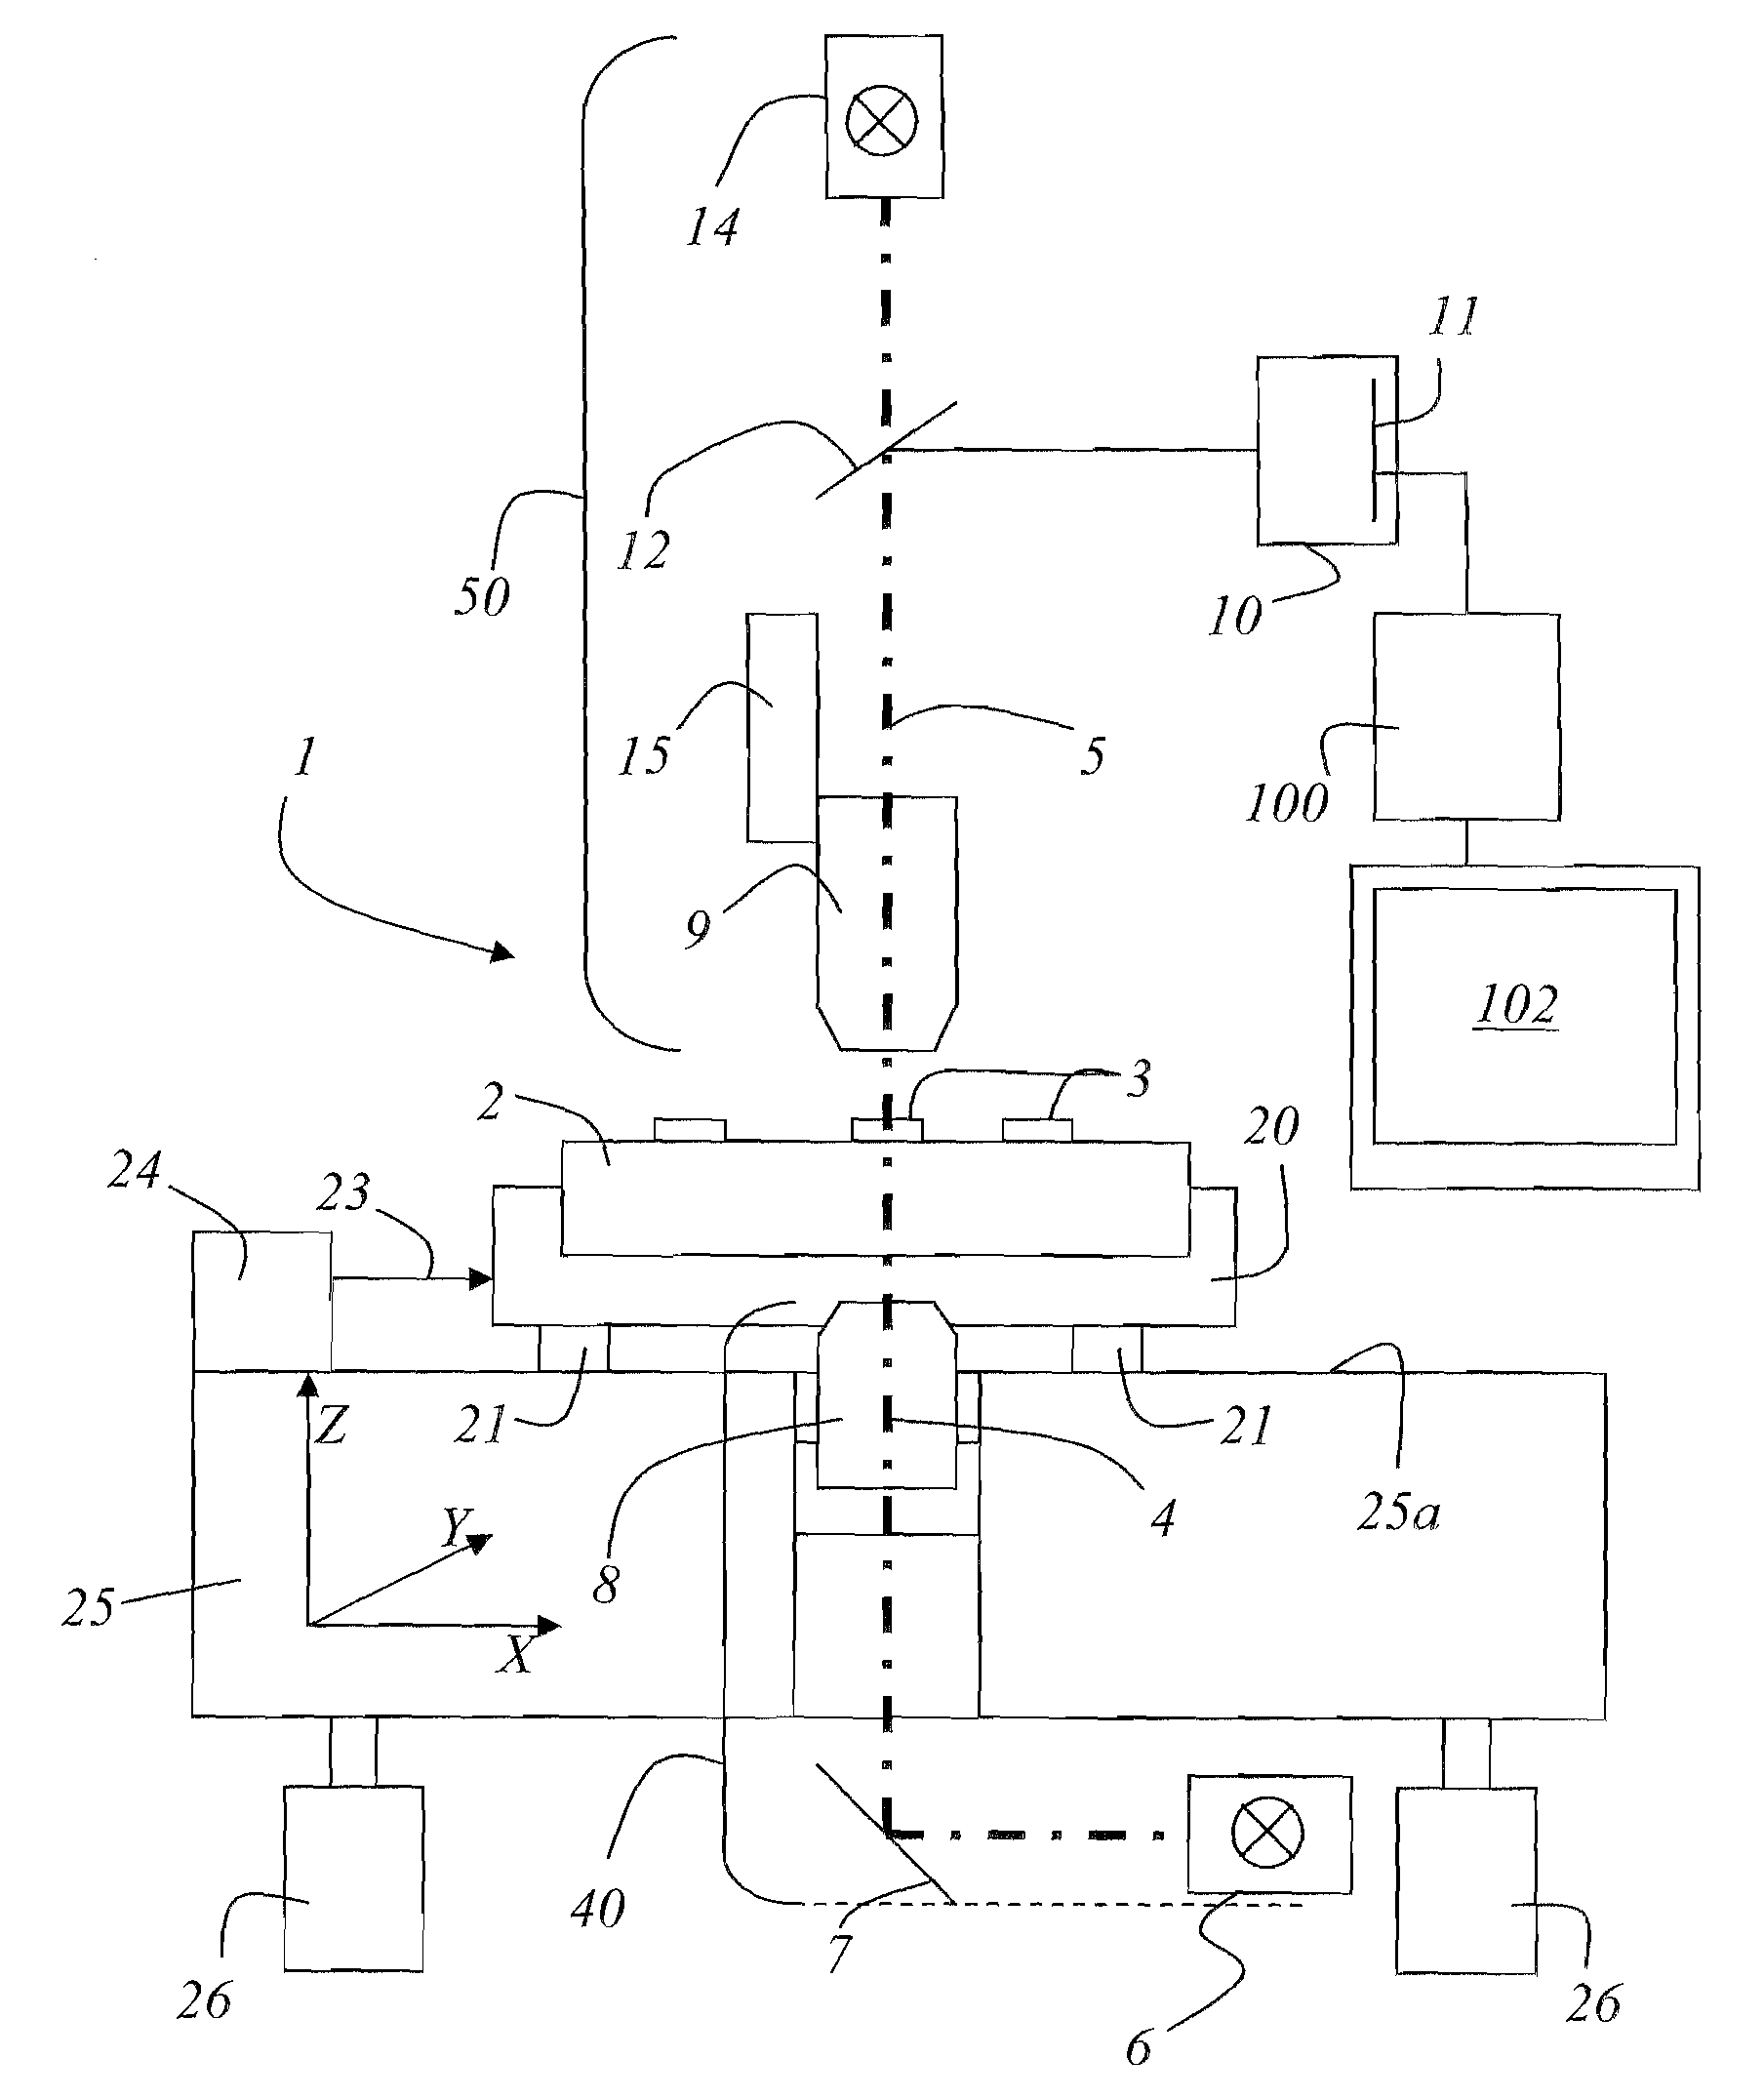 Method for eliminating sources of error in the system correction of a coordinate measuring machine